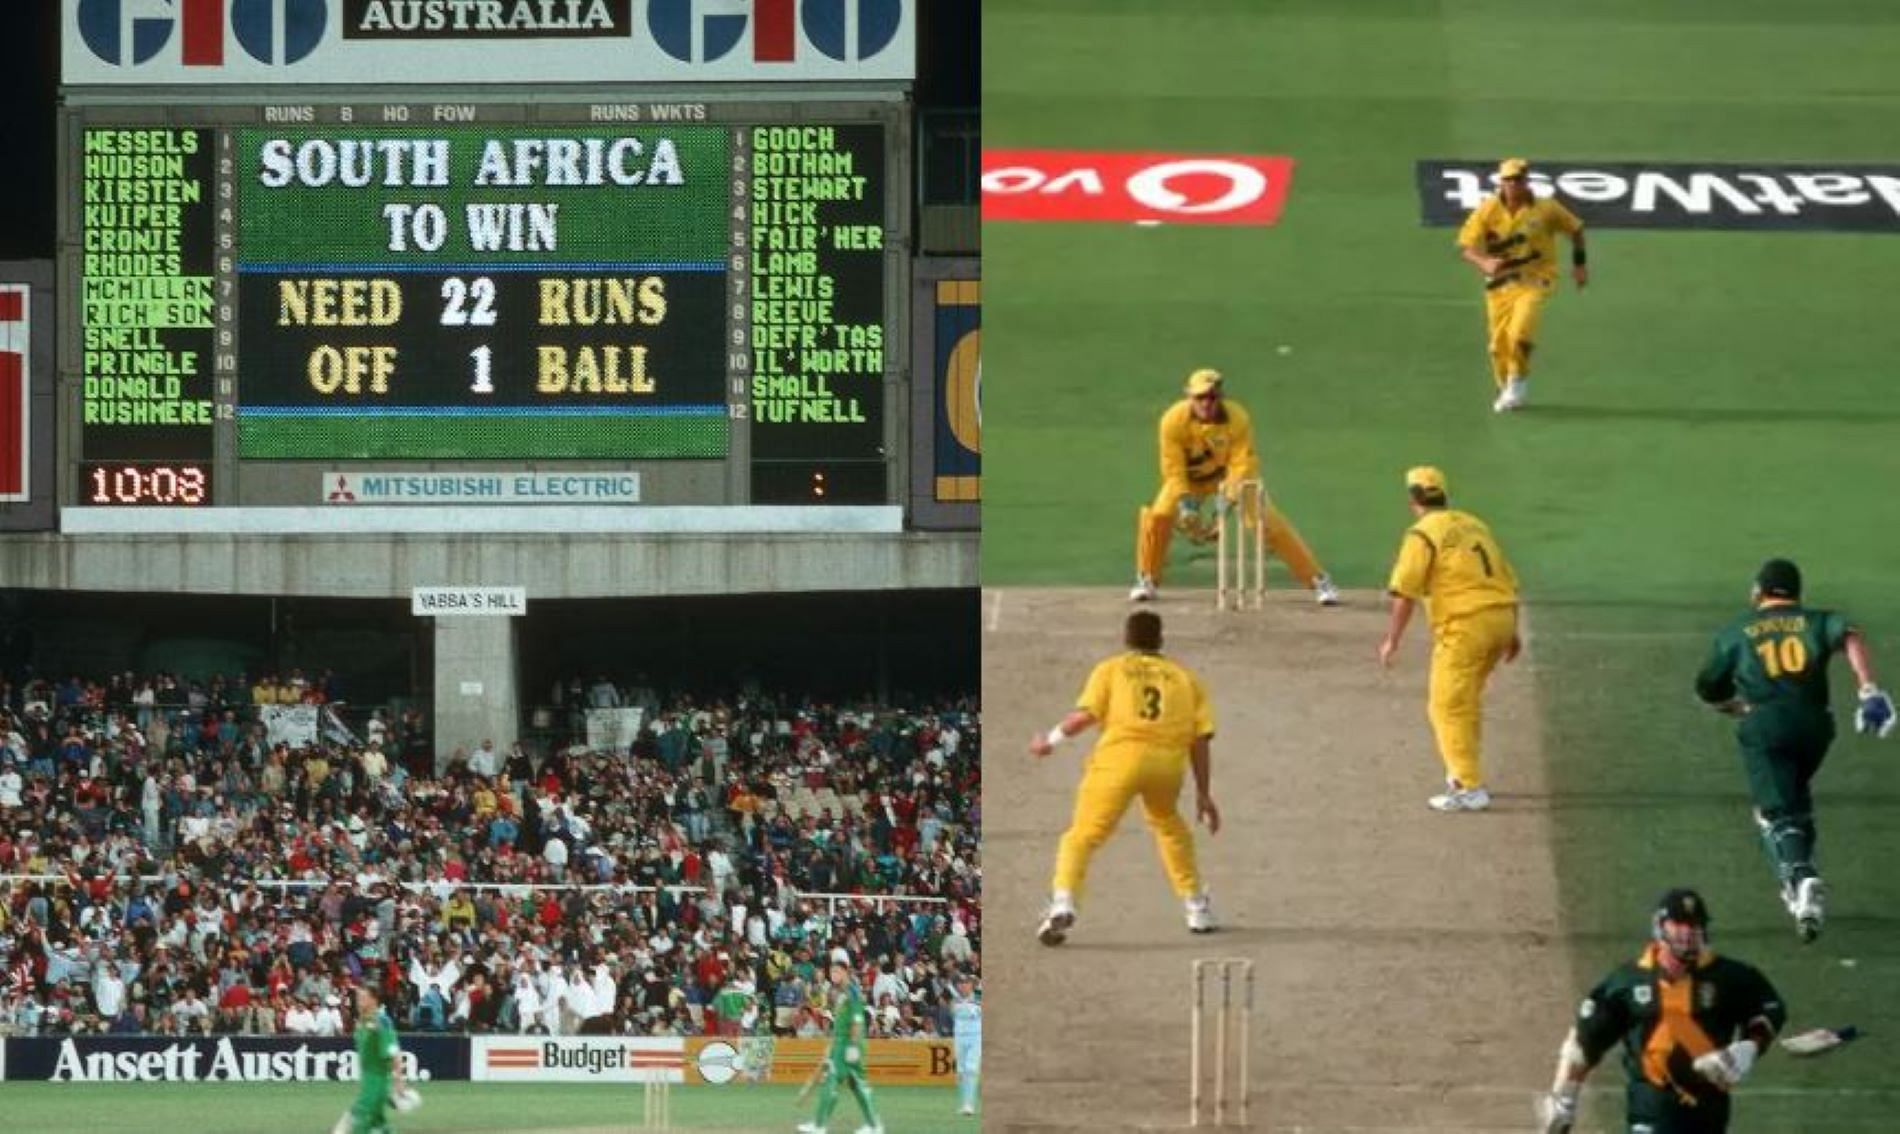 South Africans are still to recover from the 1992 and 1999 semi-final exits.